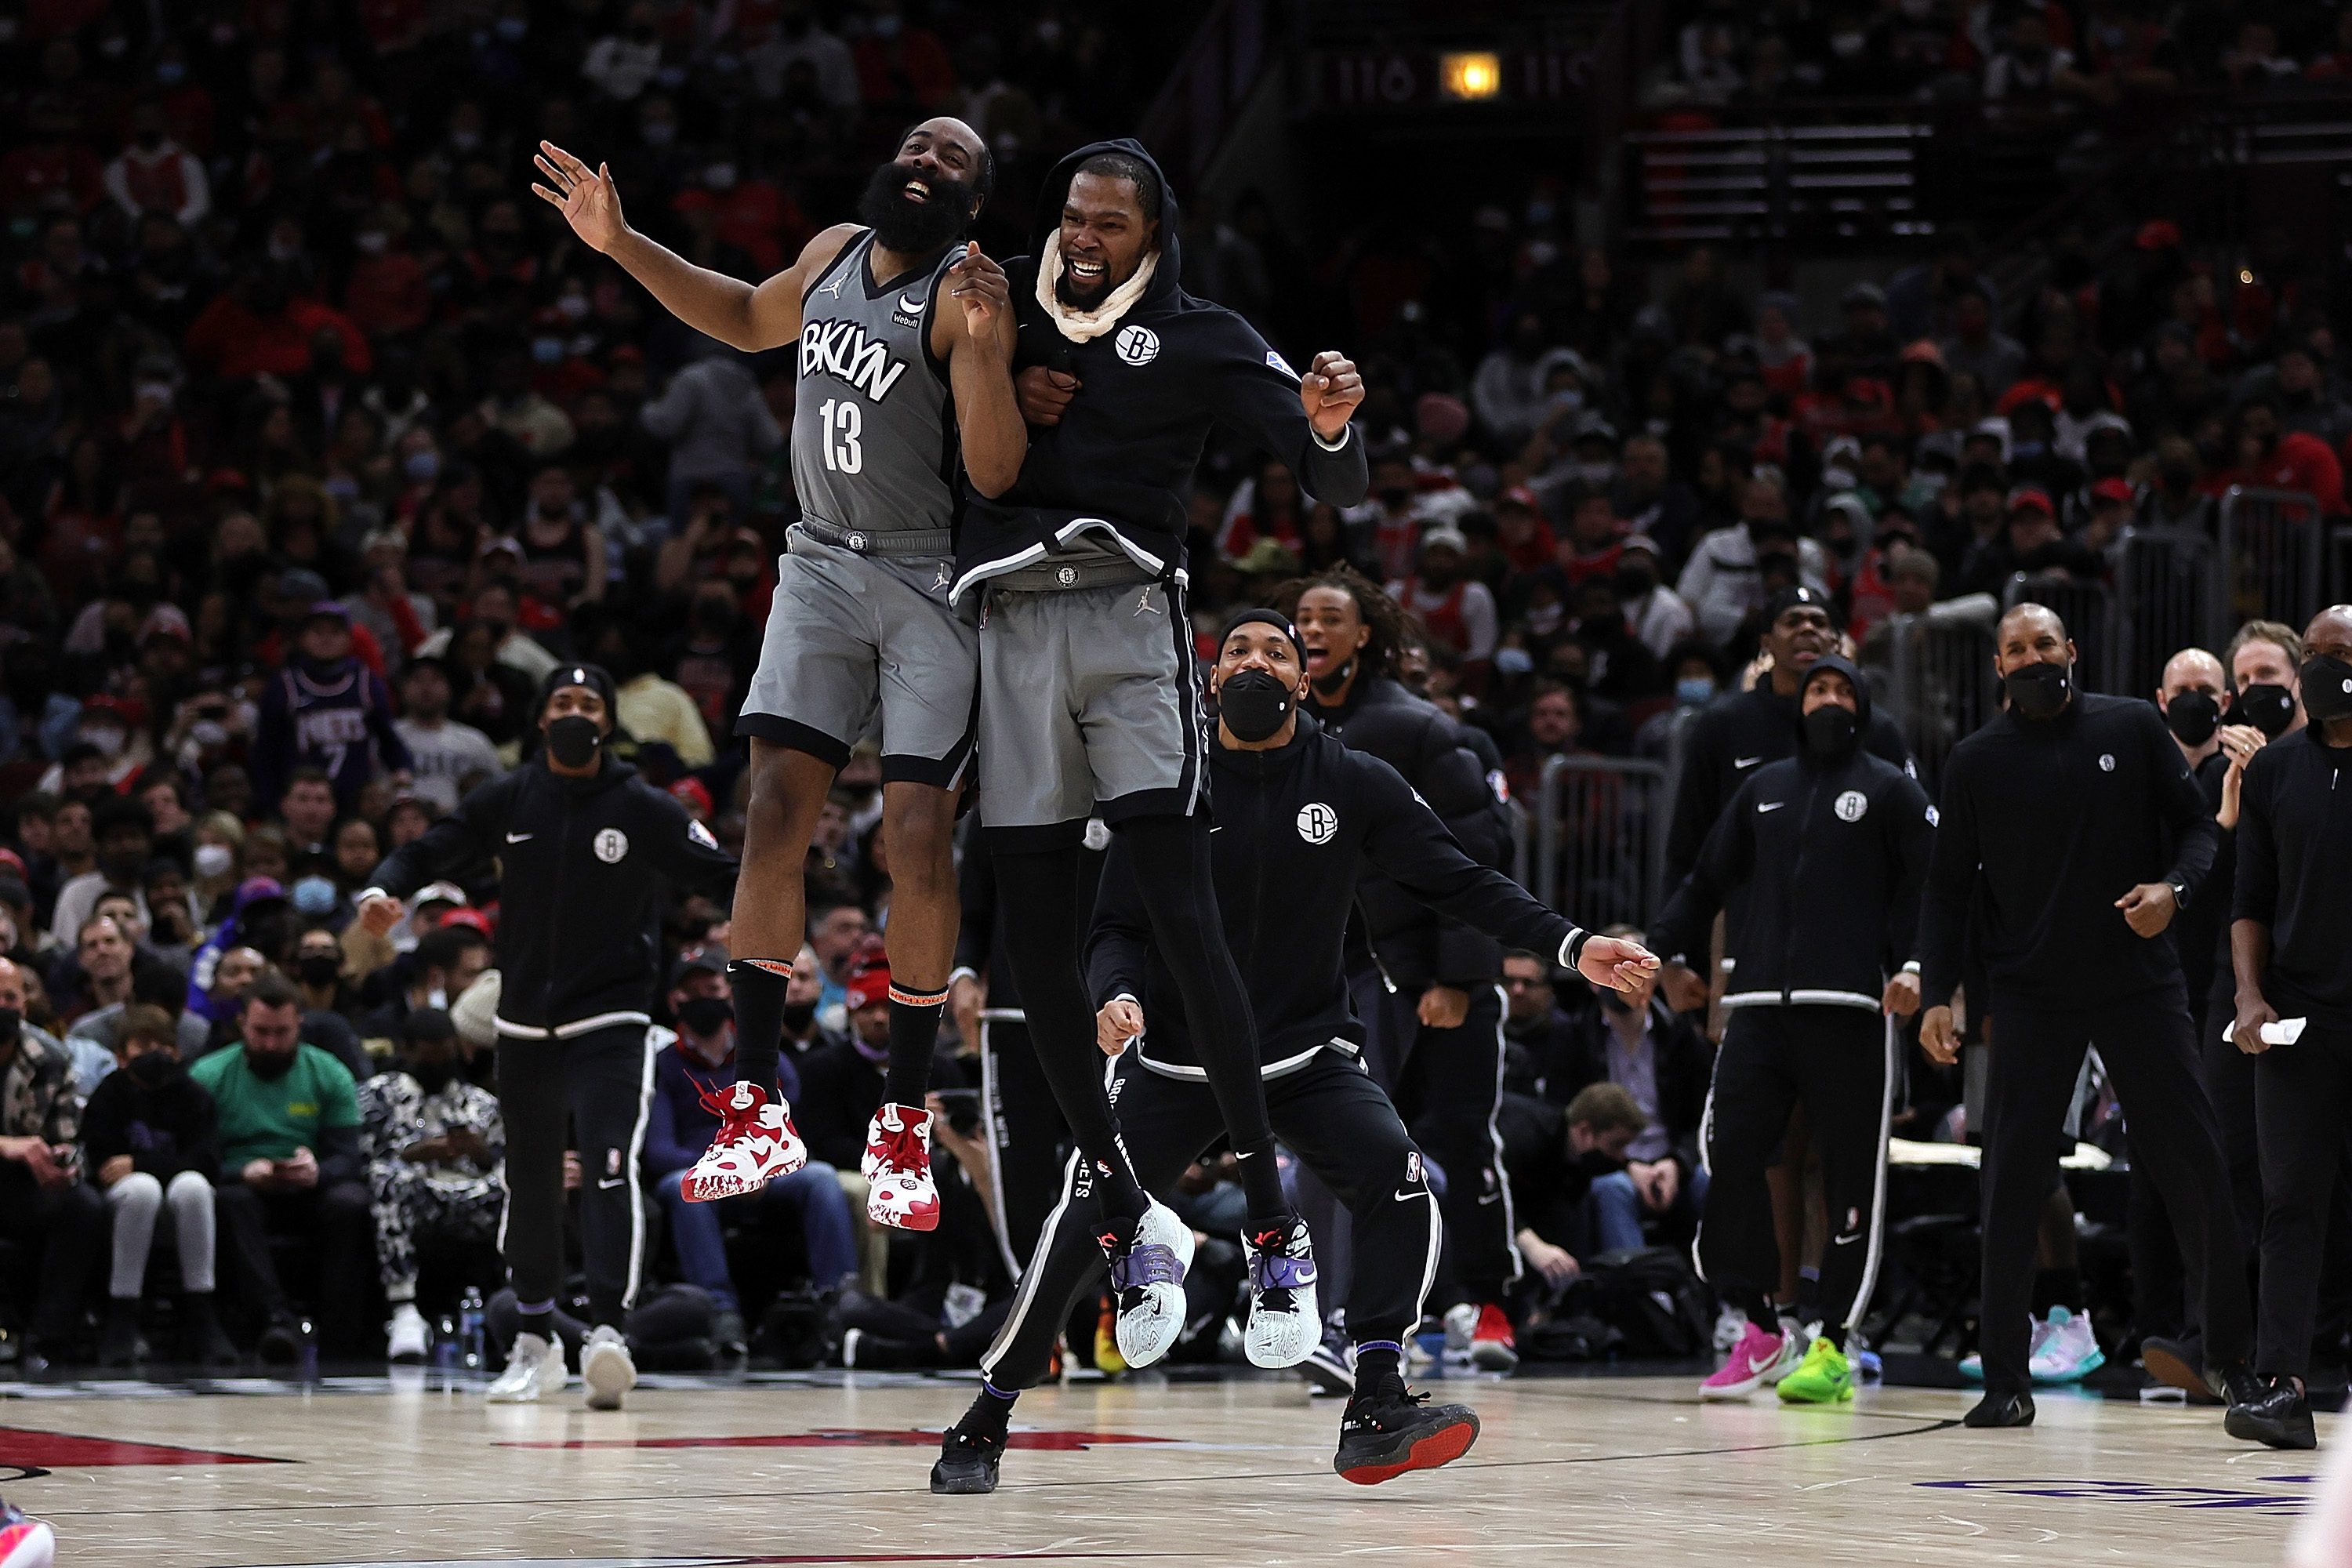 The Nets’ James Harden and Kevin Durant celebrate after a score during the second half of Brooklyn’s win over the Bulls Wednesday night at the United Center.